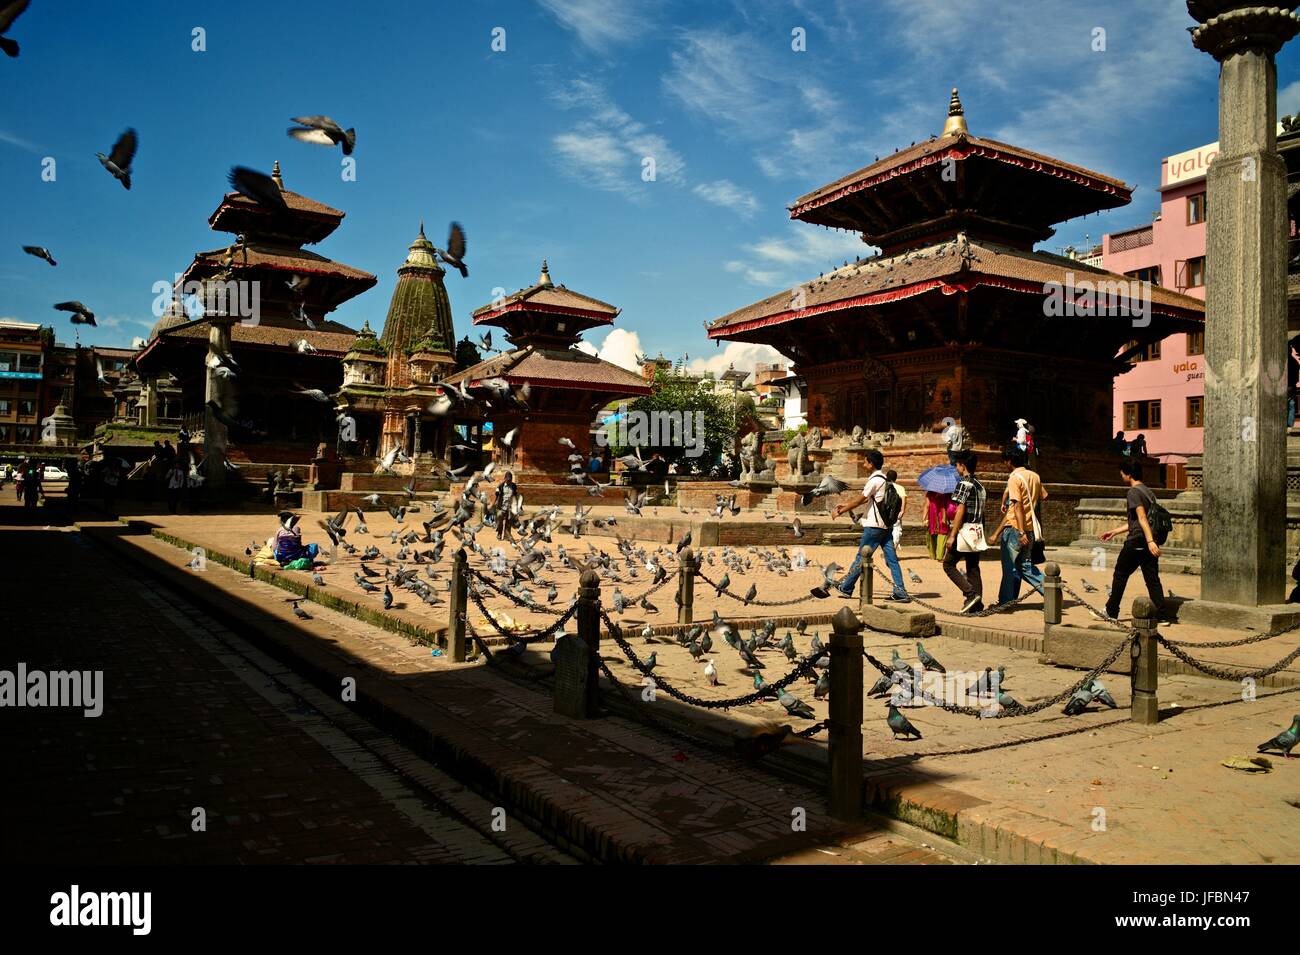 Sightseers and pigeons in Durbar Square. Stock Photo